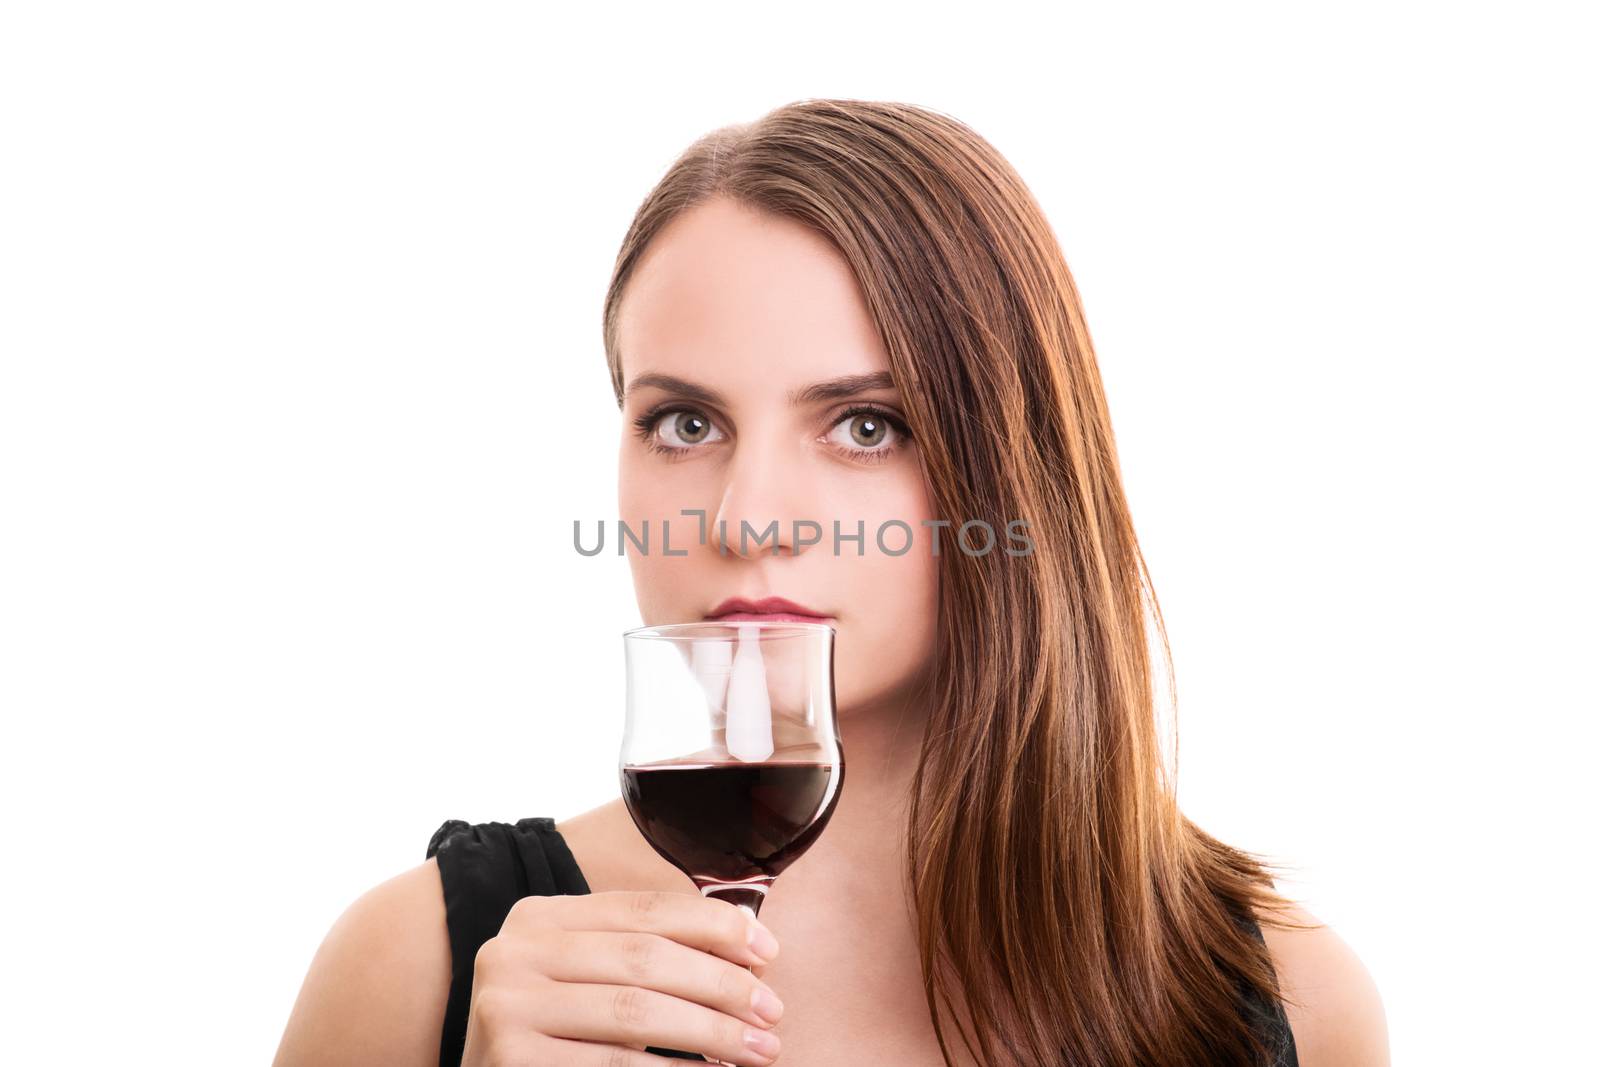 A portrait of a beautiful young woman holding a glass of wine, looking seductively, isolated on white background.